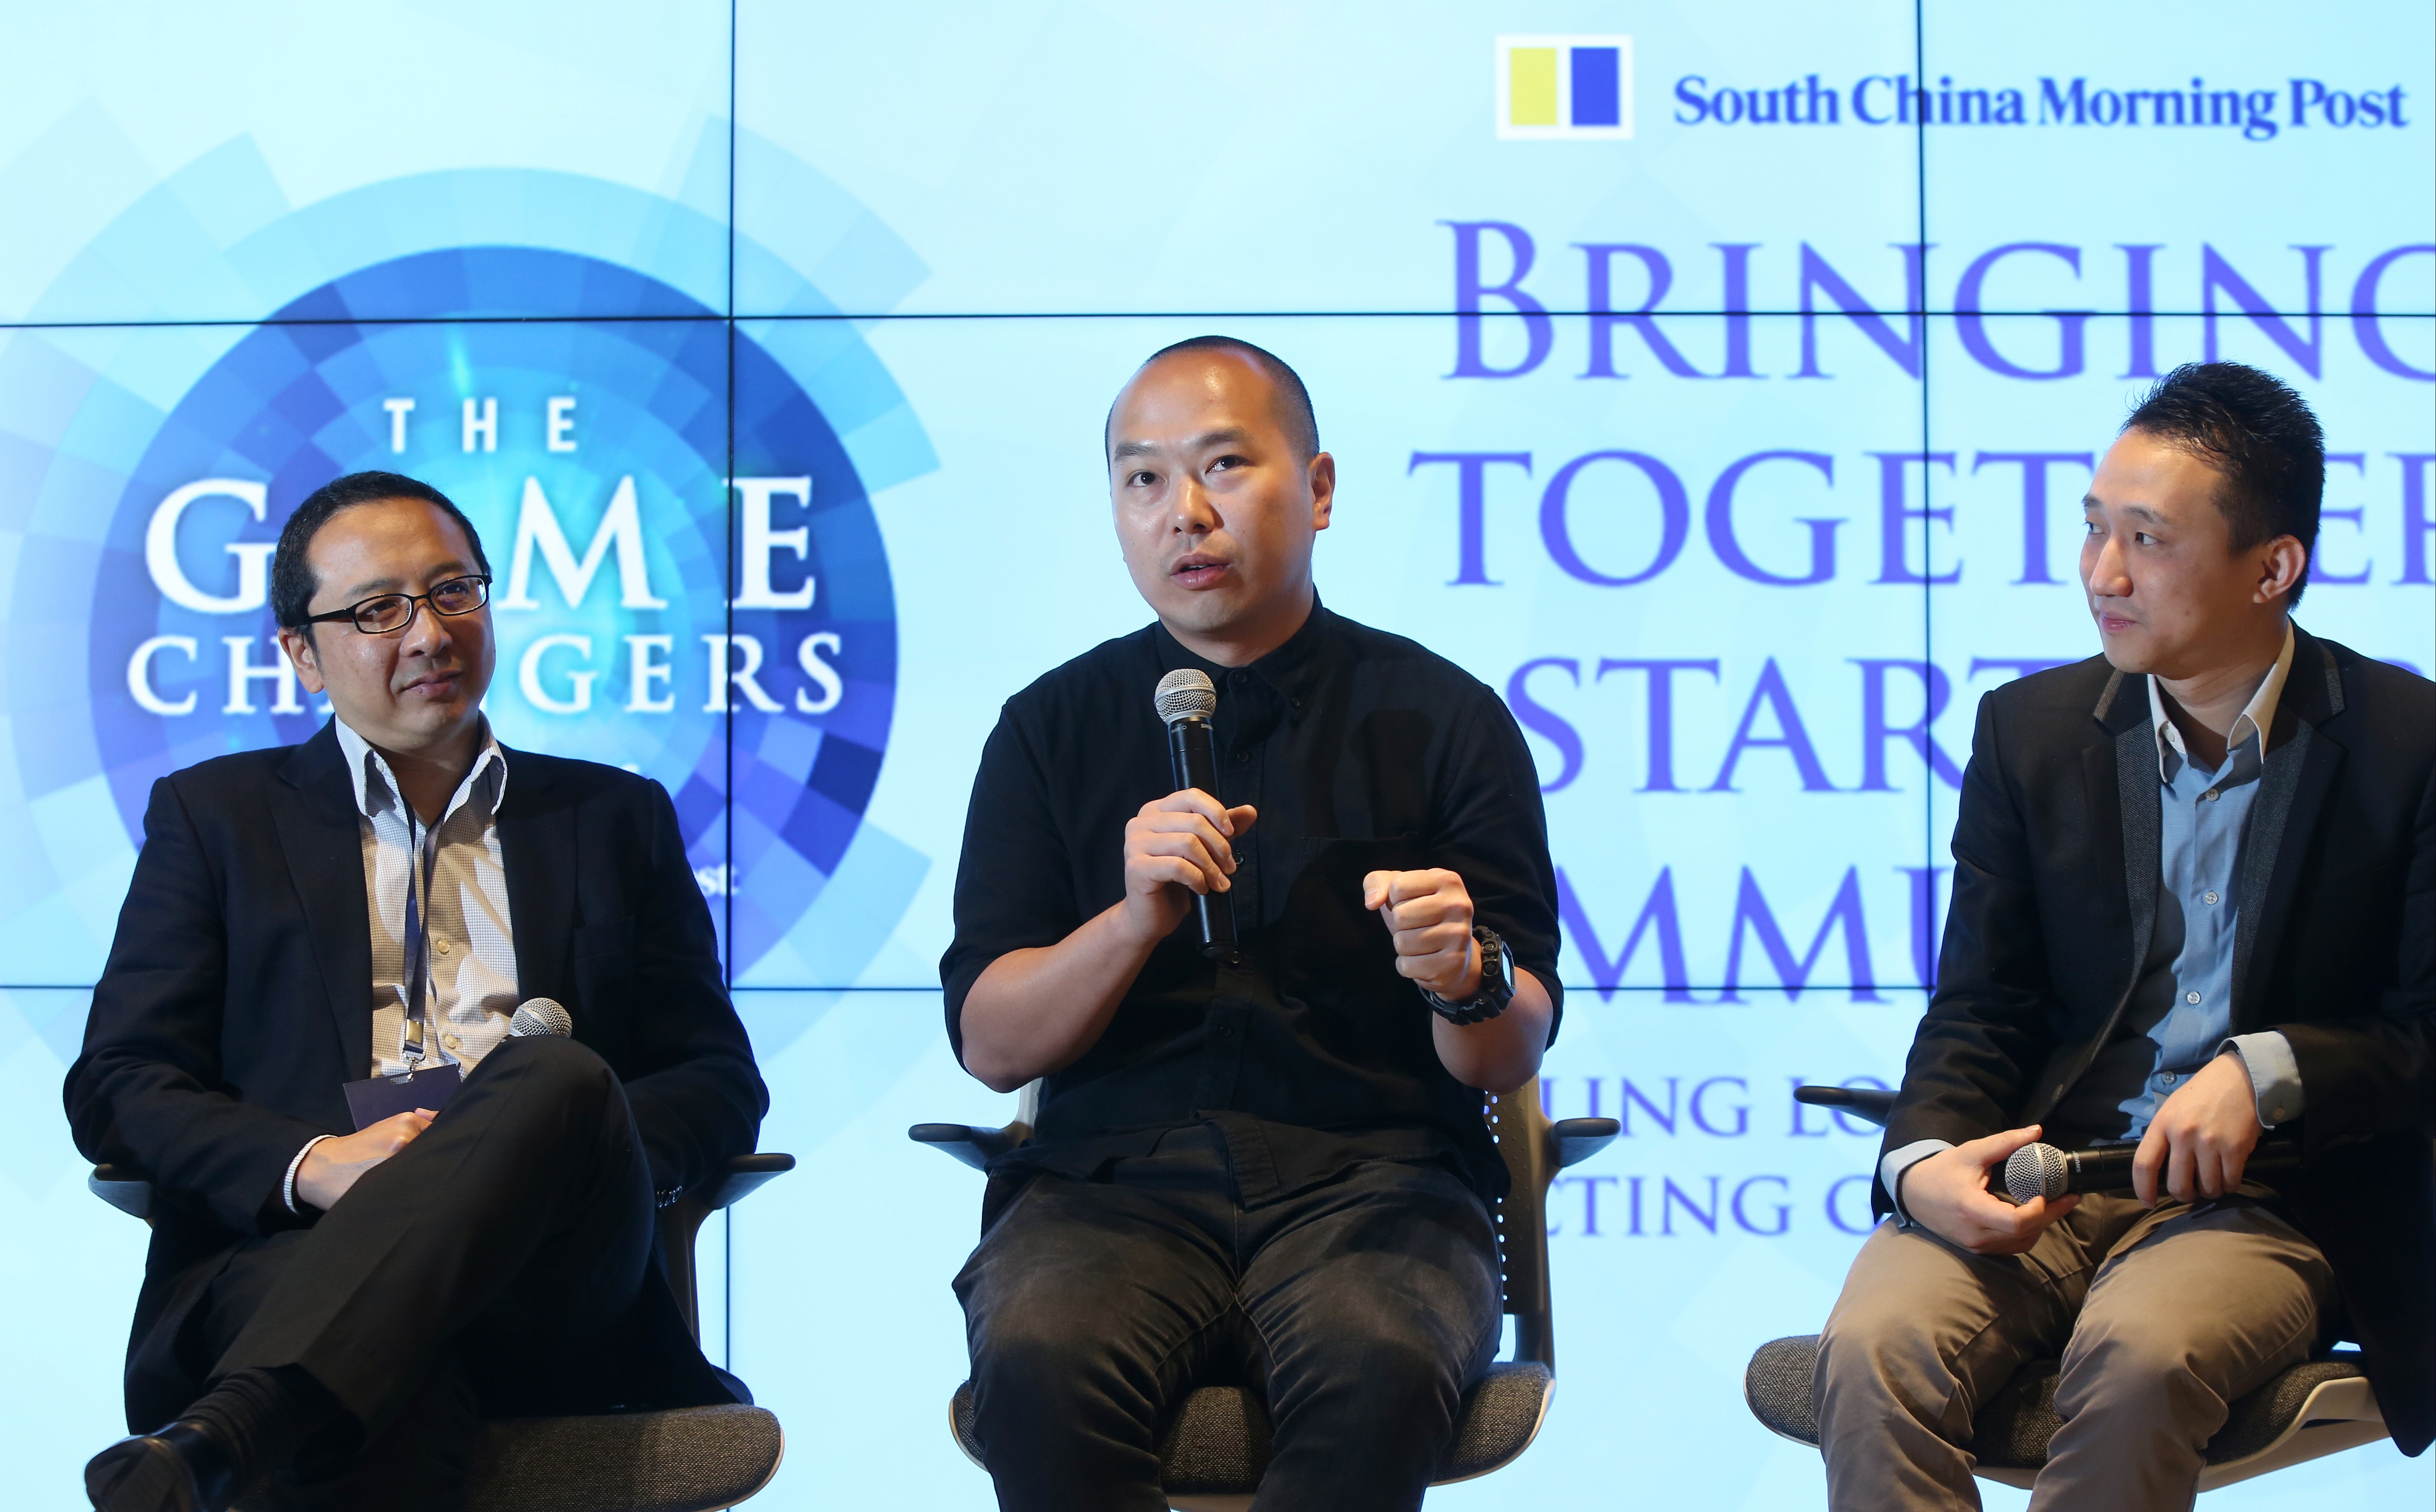 (from left) Paul Lee, co-founder of Ximplar, and co-founder and executive director of Aumeo, Ray Chan, CEO and co-founder of 9GAG, and Sum Wong, co-founder of EventXtra, attend a panel discussion at SCMP's Game Changers event, on Tuesday in Hong Kong. Photo: Xiaomei Chen